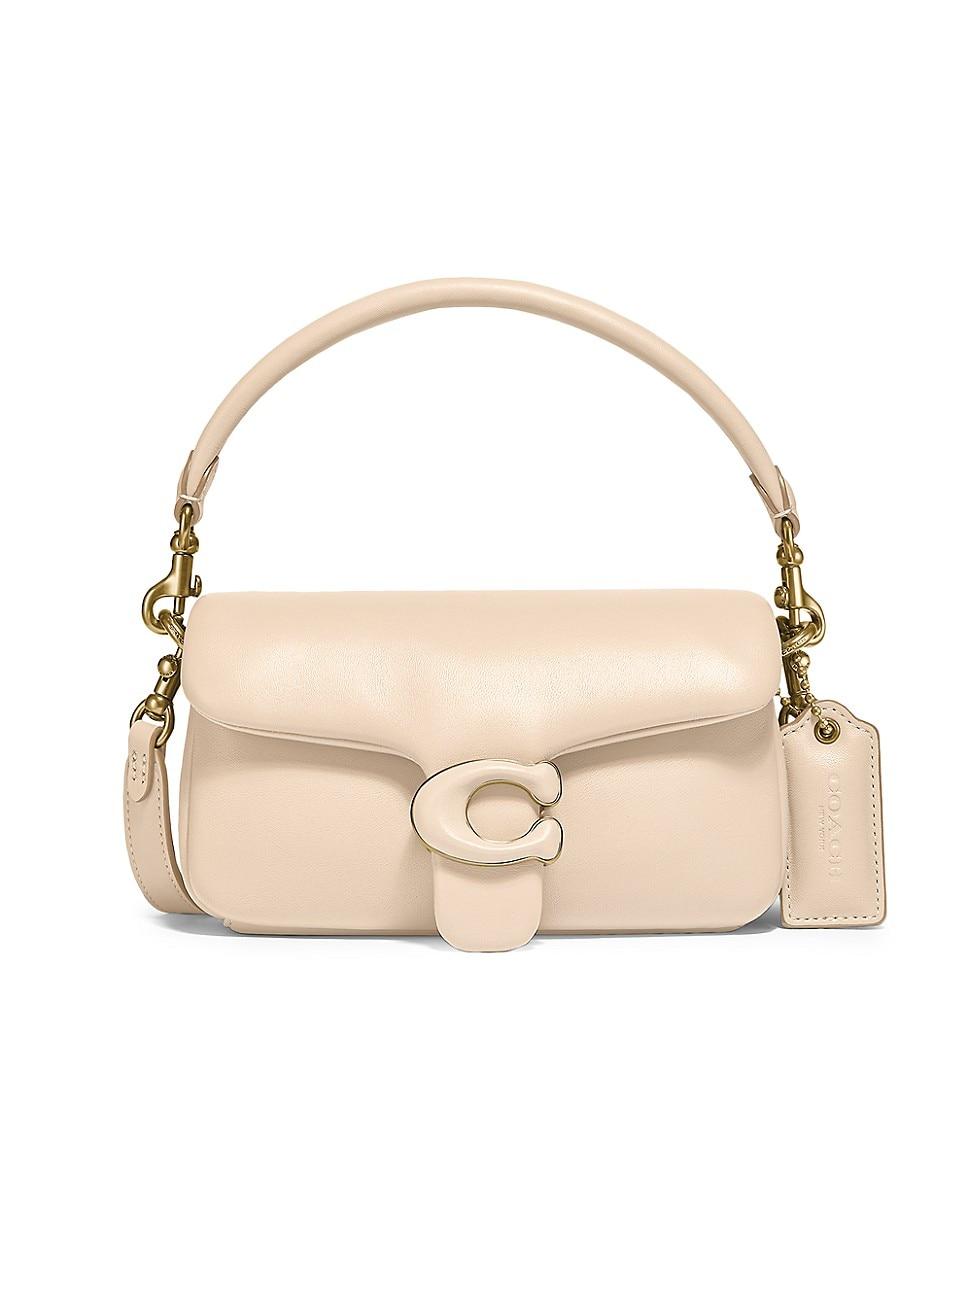 COACH Pillow Tabby 18 Leather Shoulder Bag in Ivory (White) | Lyst